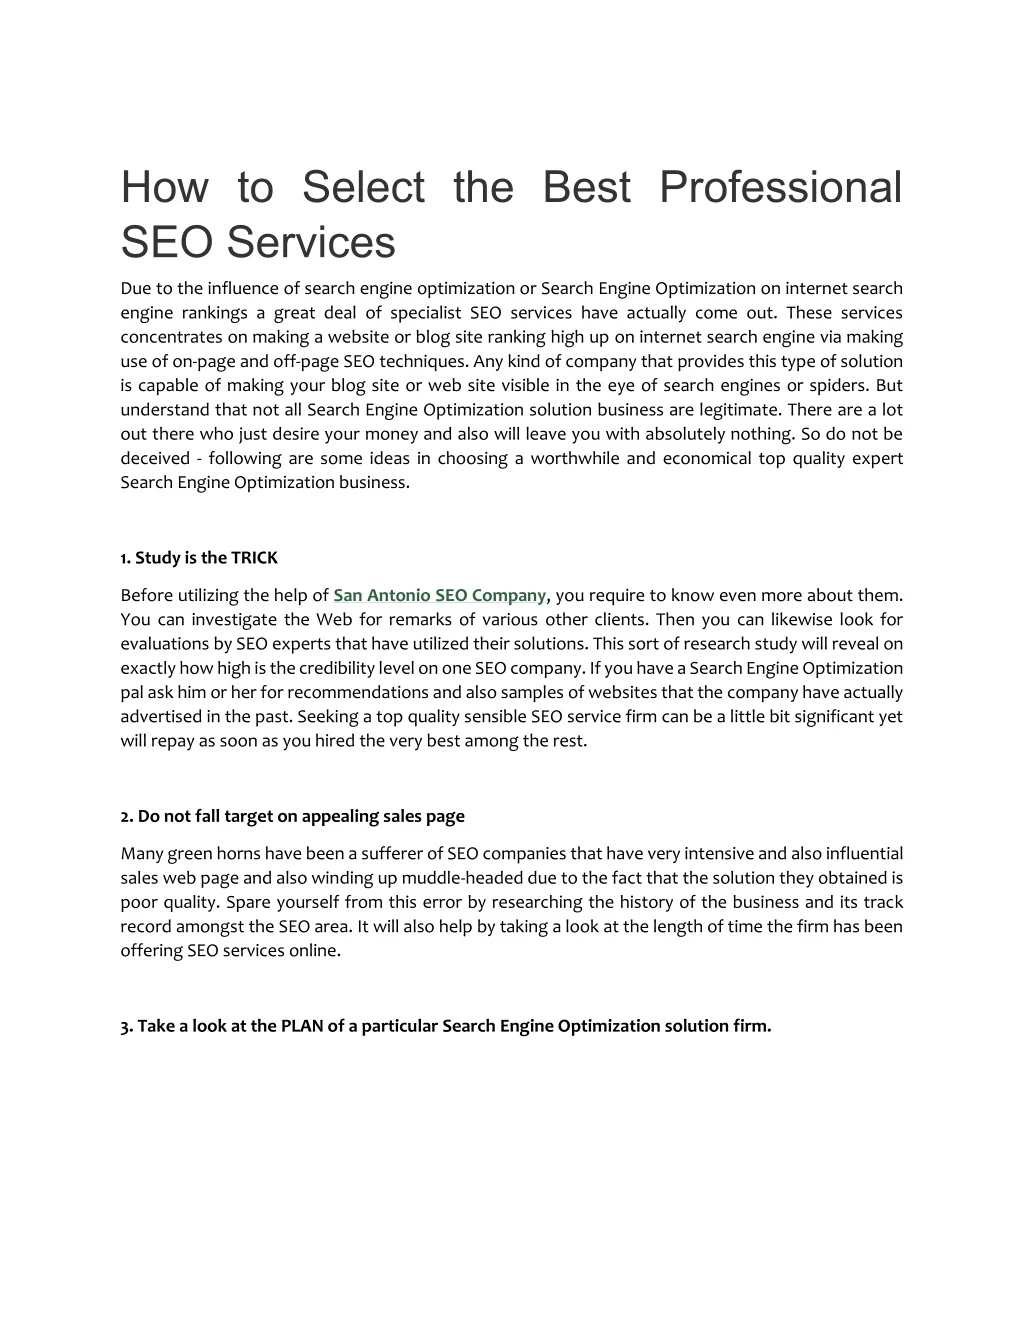 how to select the best professional seo services